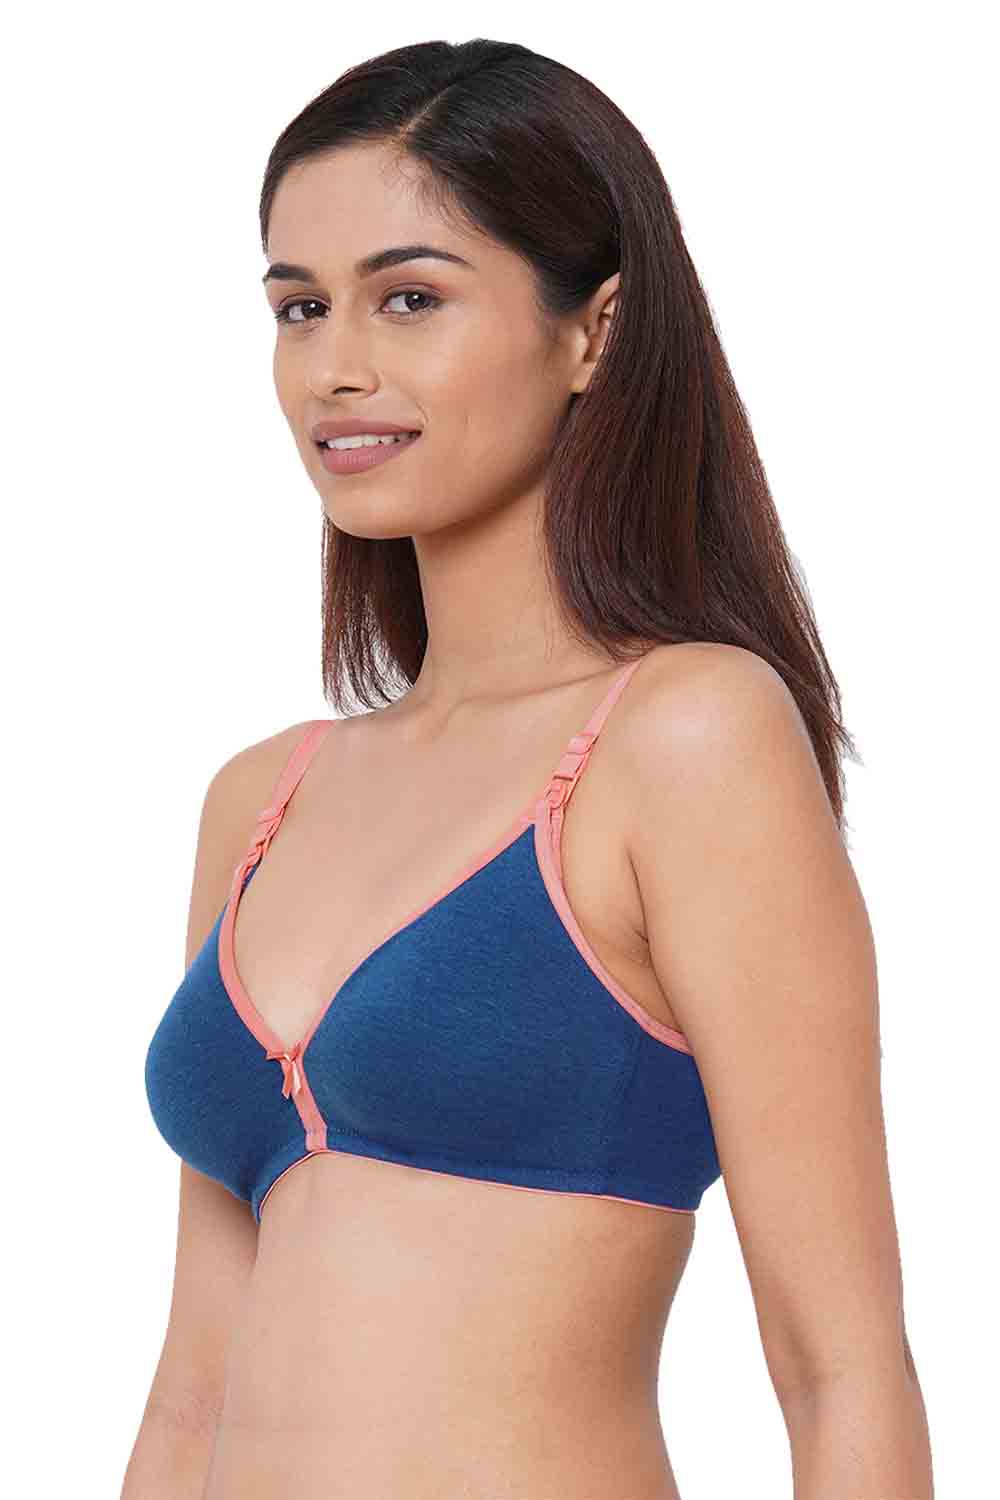 IN CARE Pink & Peach Cotton Nursing Bras - Pack Of 2